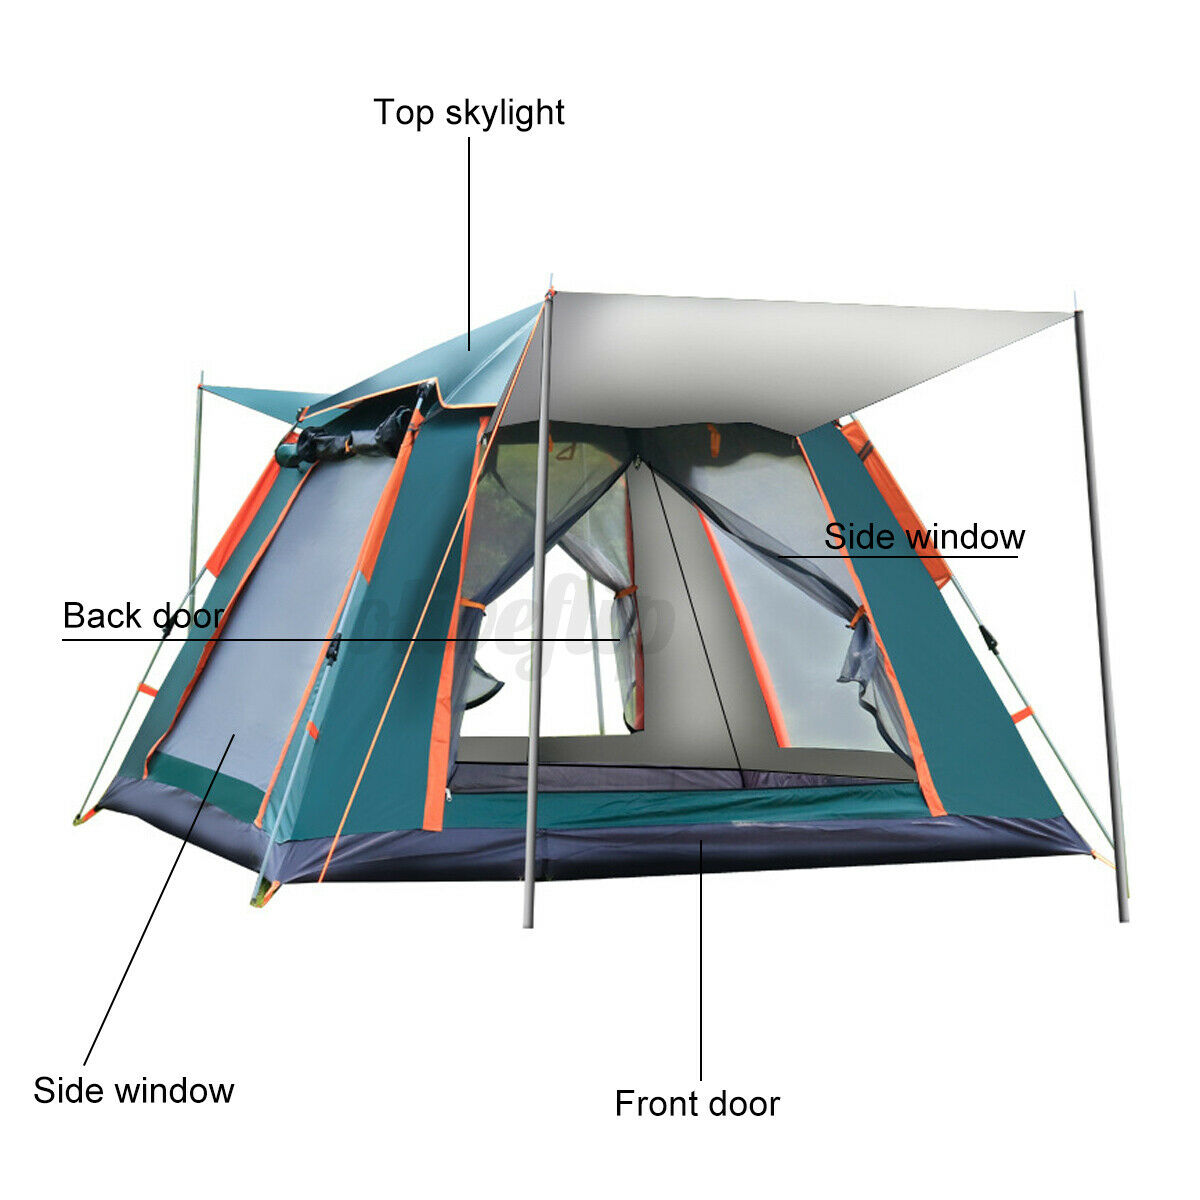 4 People Large Tent Quick Setup Family Tent Outdoor Waterproof Camping Hiking Foldable Folding Tent Double Layer Family Tents